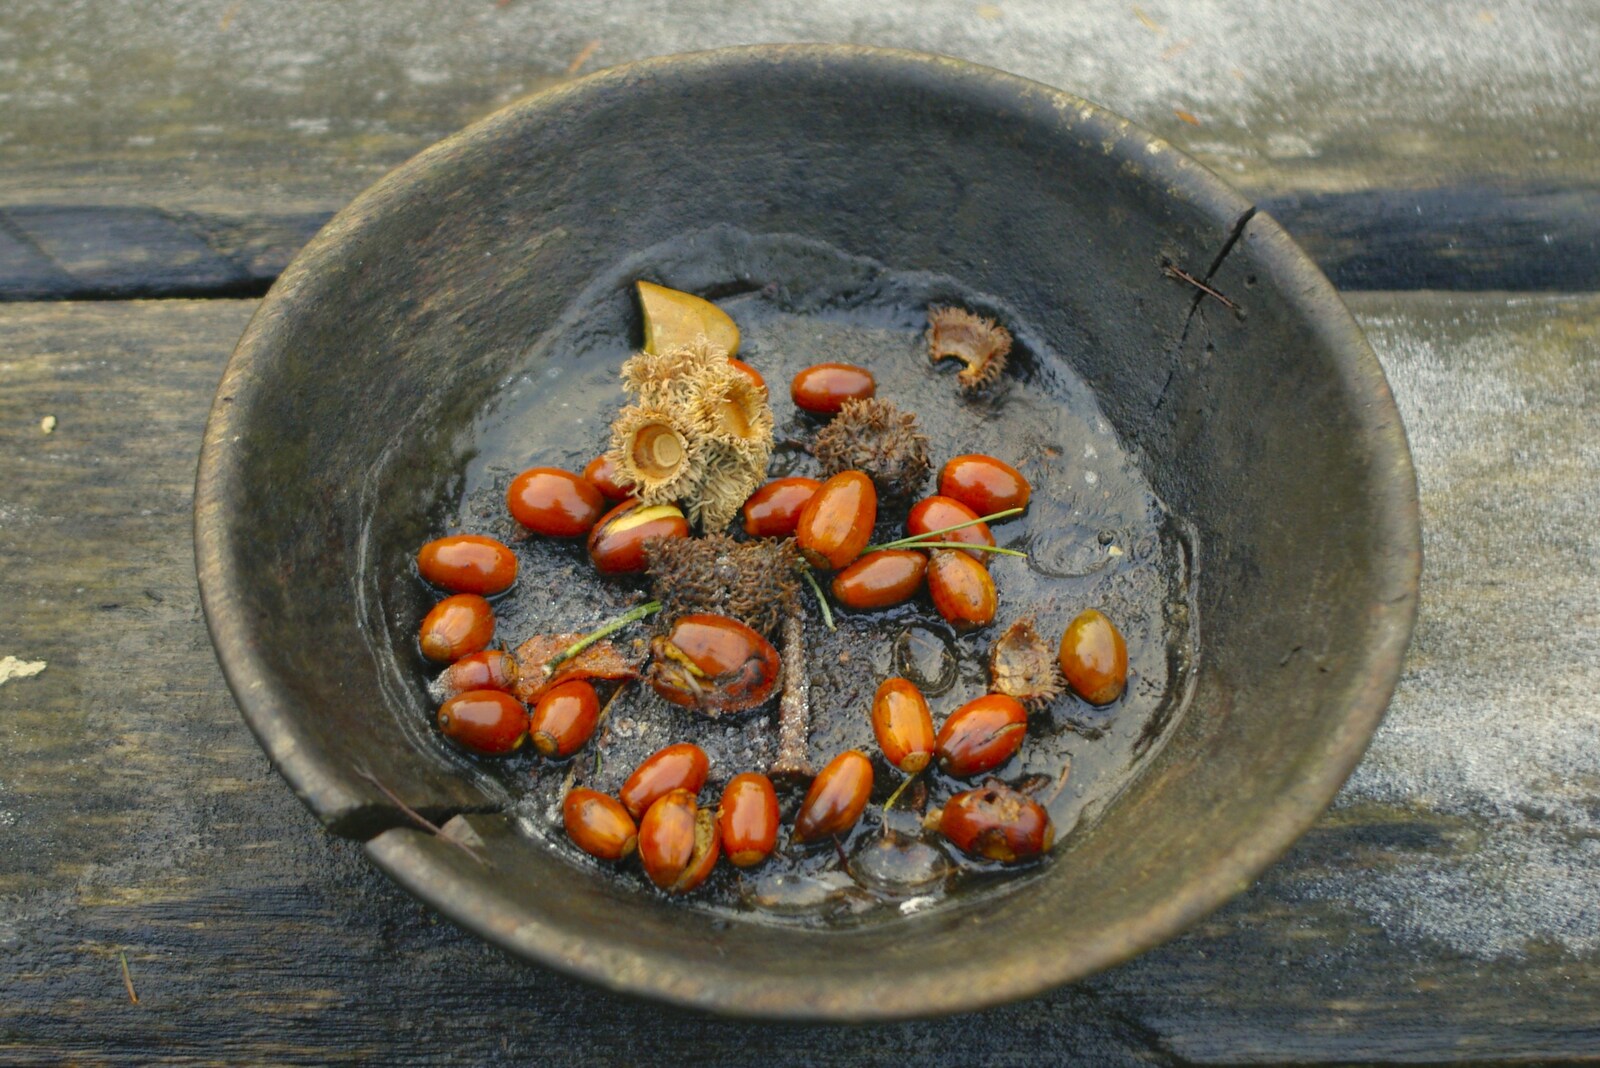 Acorns in a bowl from Thornham Walled Garden, and Bob Last Leaves the Lab, Cambridge - 20th November 2005